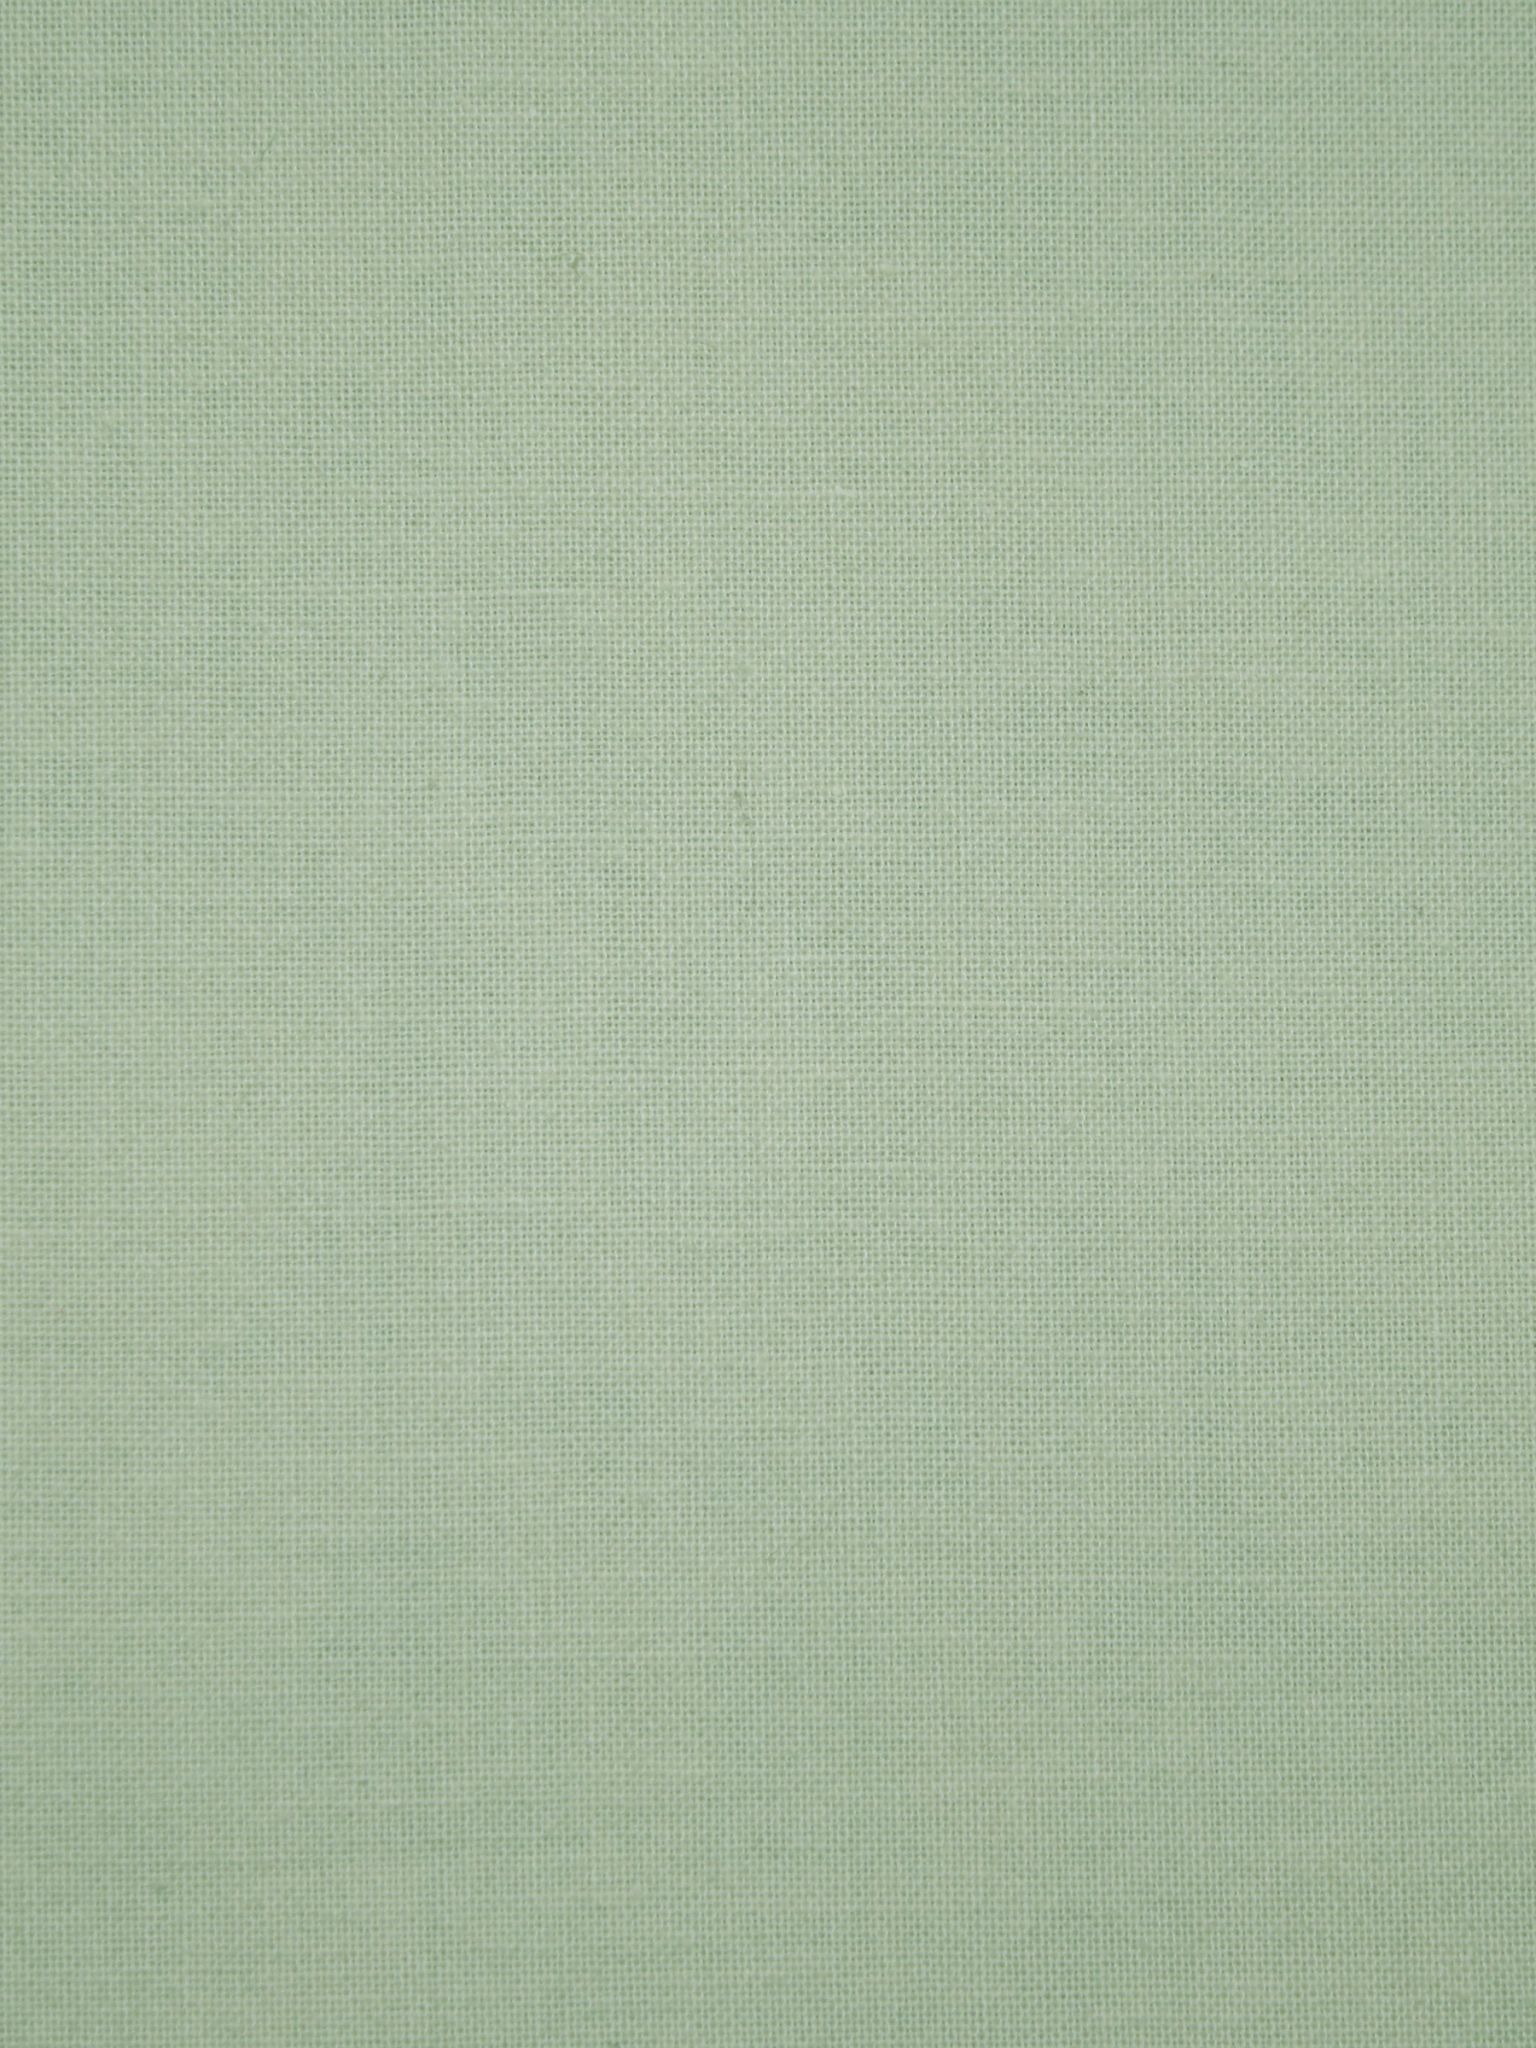 Free download Sage Green Canvas Fabric Texture Picture Photograph Photo [3600x2400] for your Desktop, Mobile & Tablet. Explore Sage Green Wallpaper. Light Green Textured Wallpaper, Green Textured Wallpaper, Green